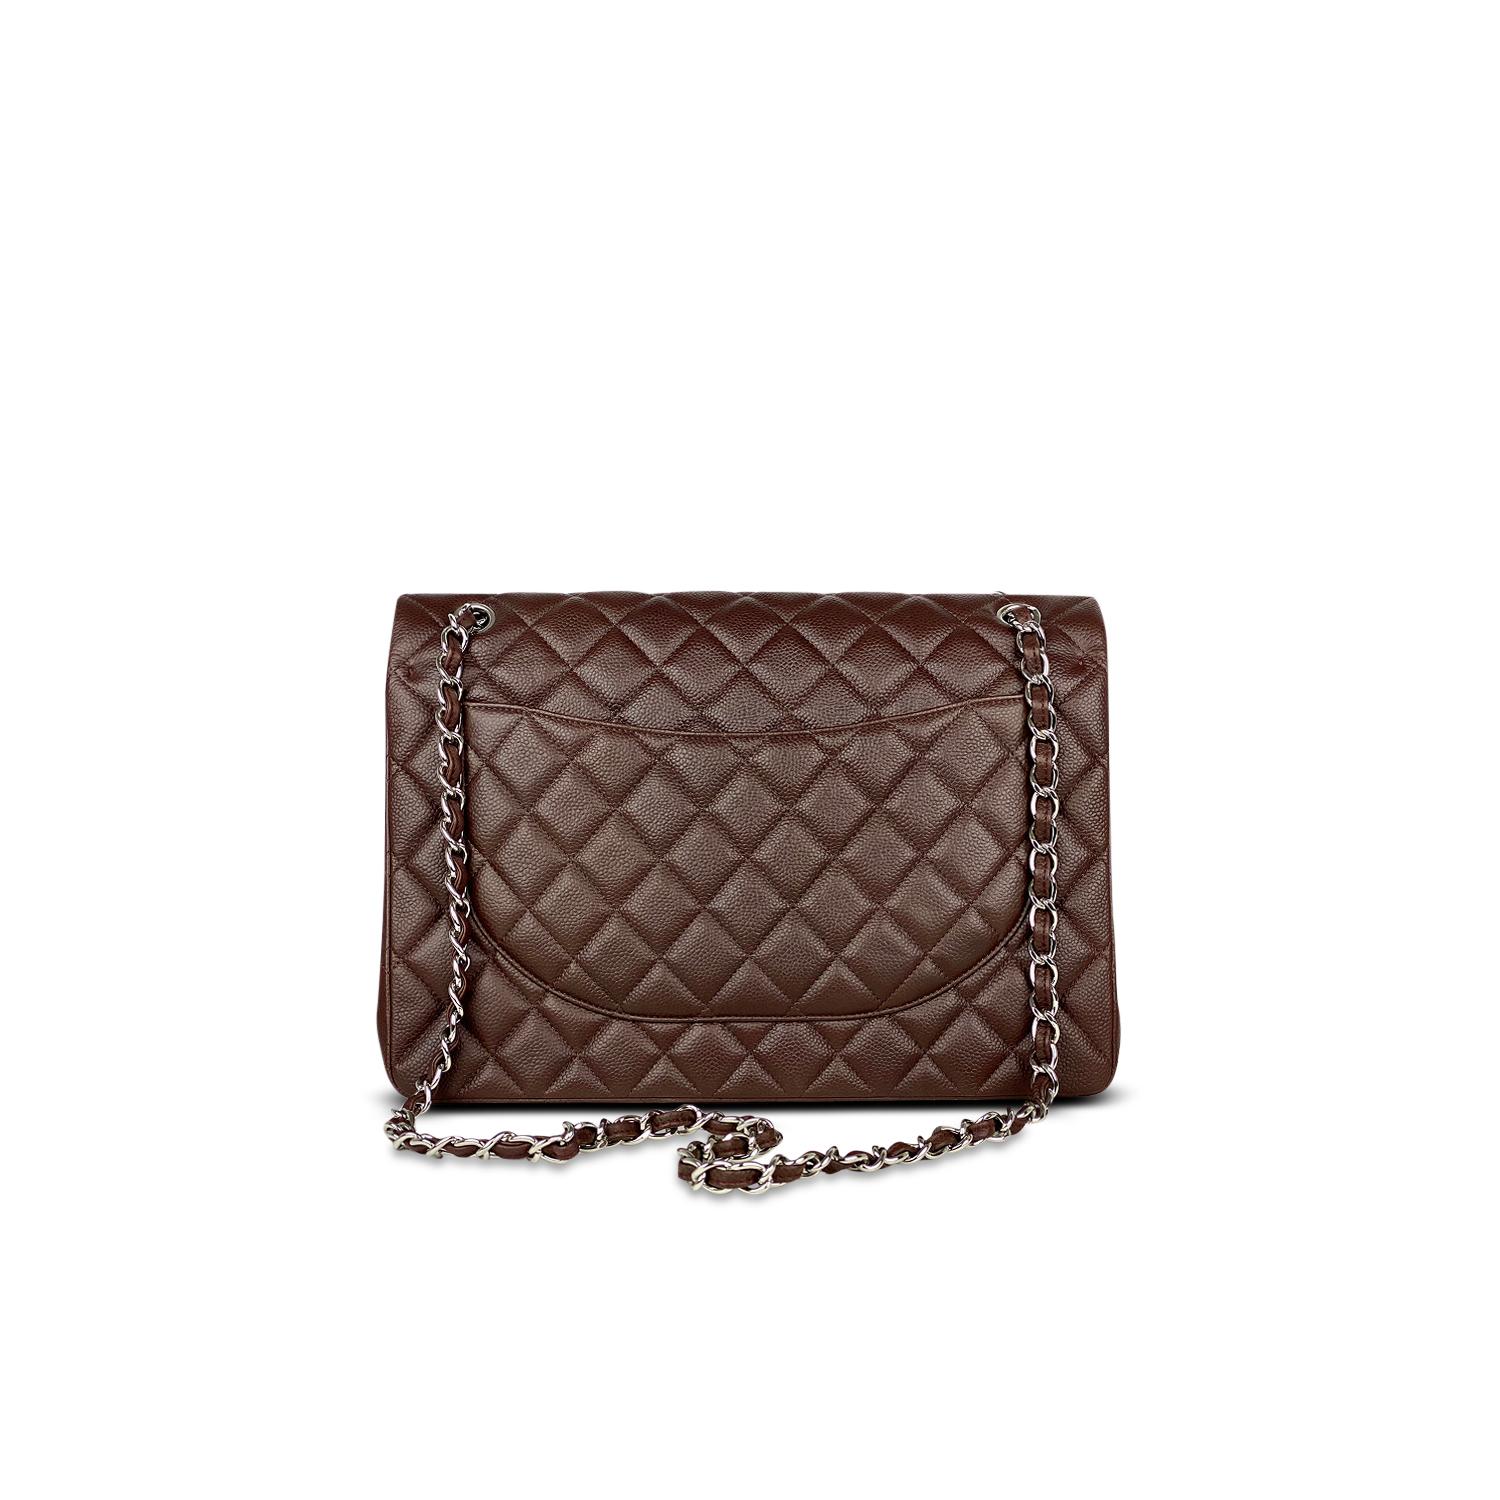 Brown quilted caviar skin Chanel Maxi Classic/Timeless Double Flap bag with

– Silver-tone hardware
– Convertible chain-link and leather shoulder strap
– Tonal leather lining
– Single patch pocket at back
– Single zip pocket at flap underside, three